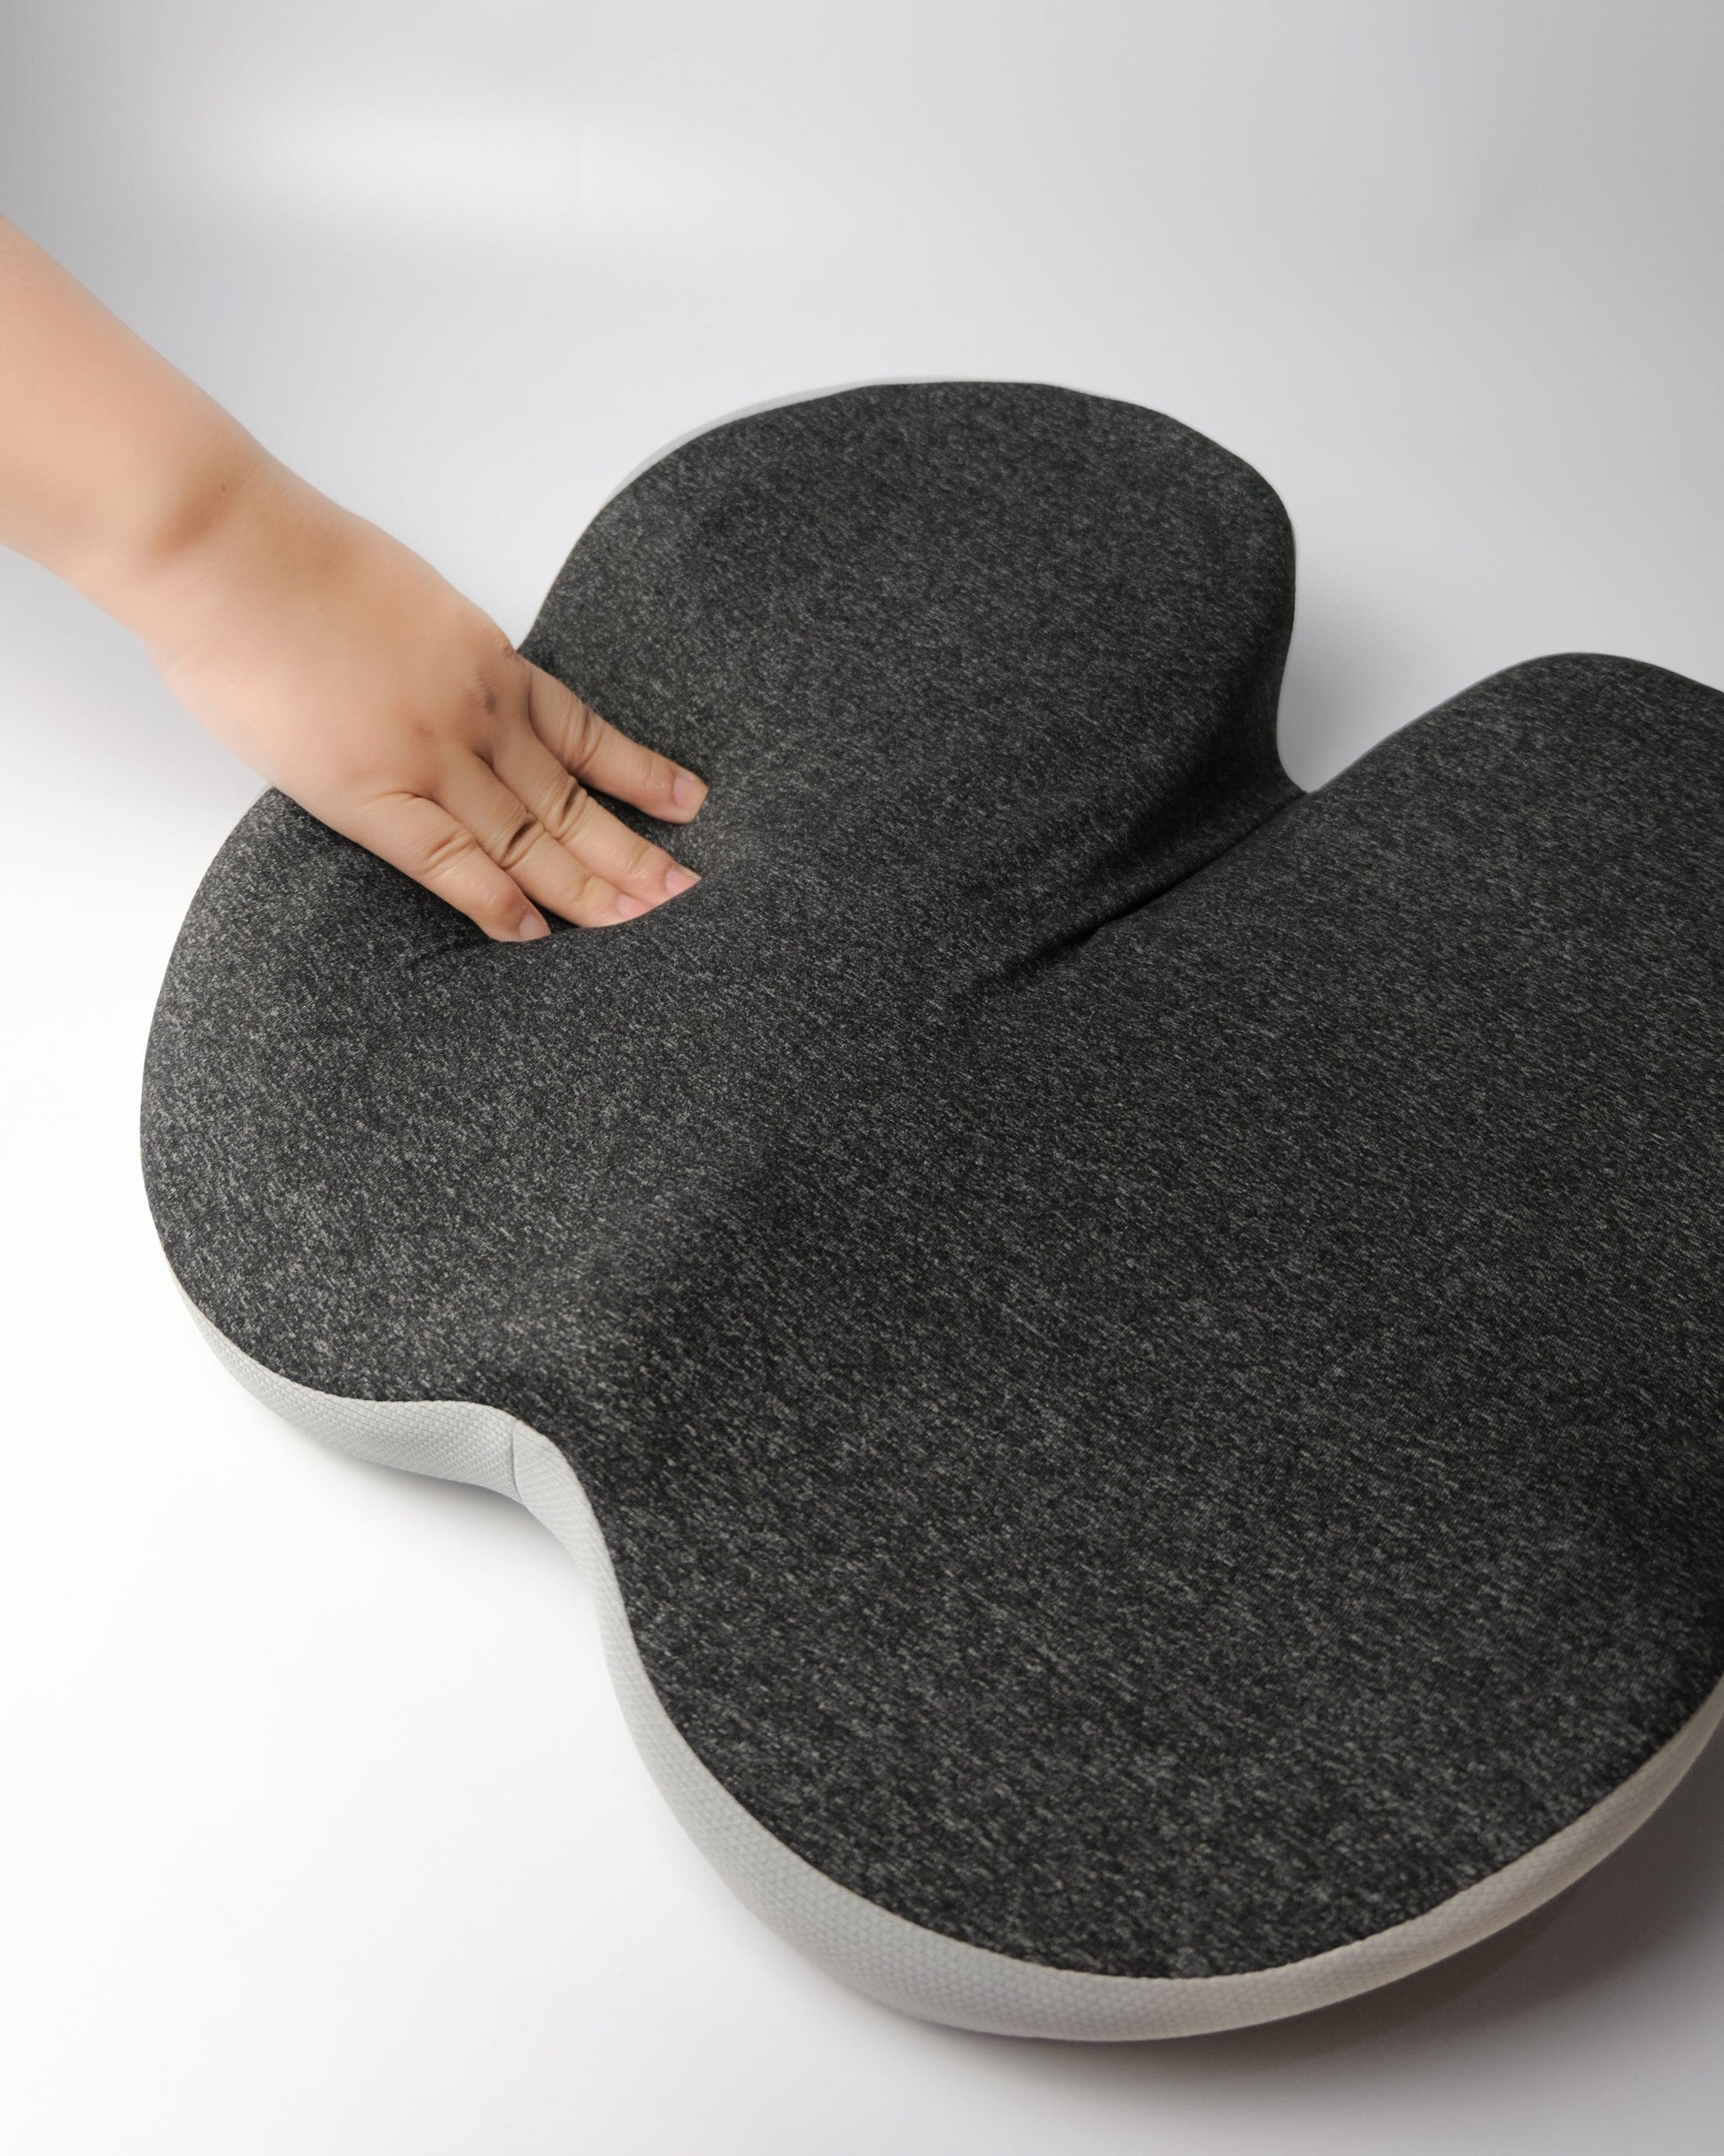 Cushion Lab Pressure Relief Seat Cushion for Long Sitting Hrs Memory Foam  Gray A 